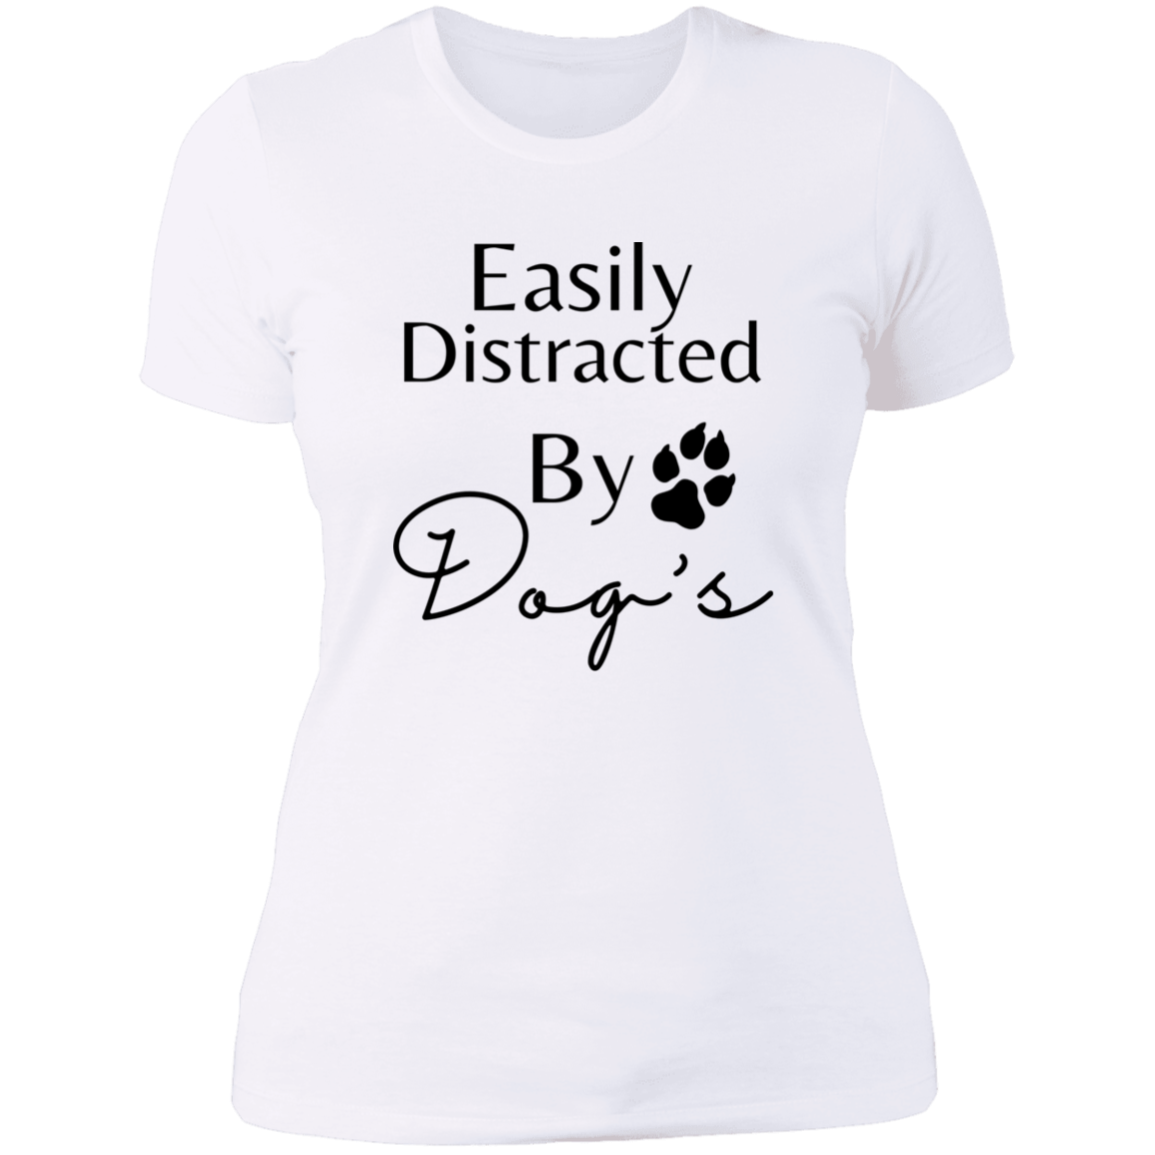 Easily Distracted by dogs Women's Tee